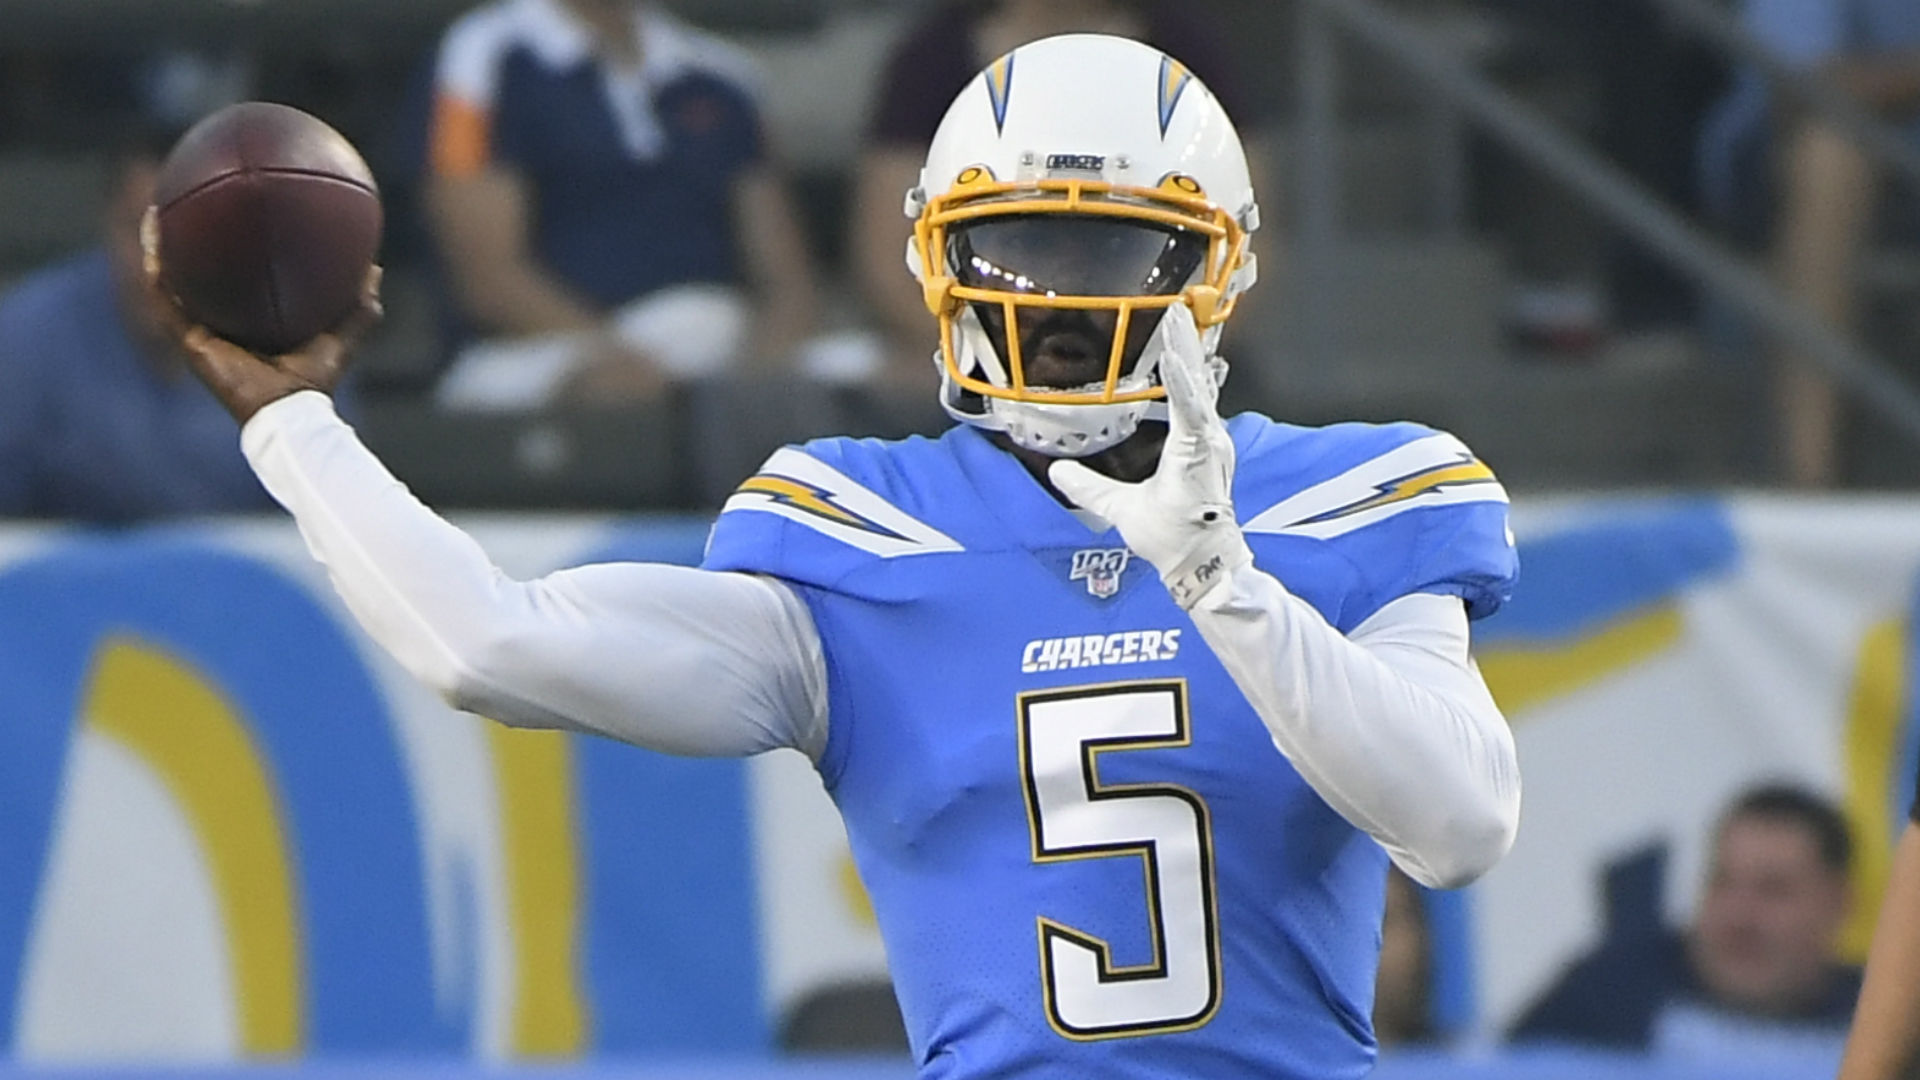 Quarterback Tyrod Taylor expects the Los Angeles Chargers to surprise people if he is the starter in 2020.